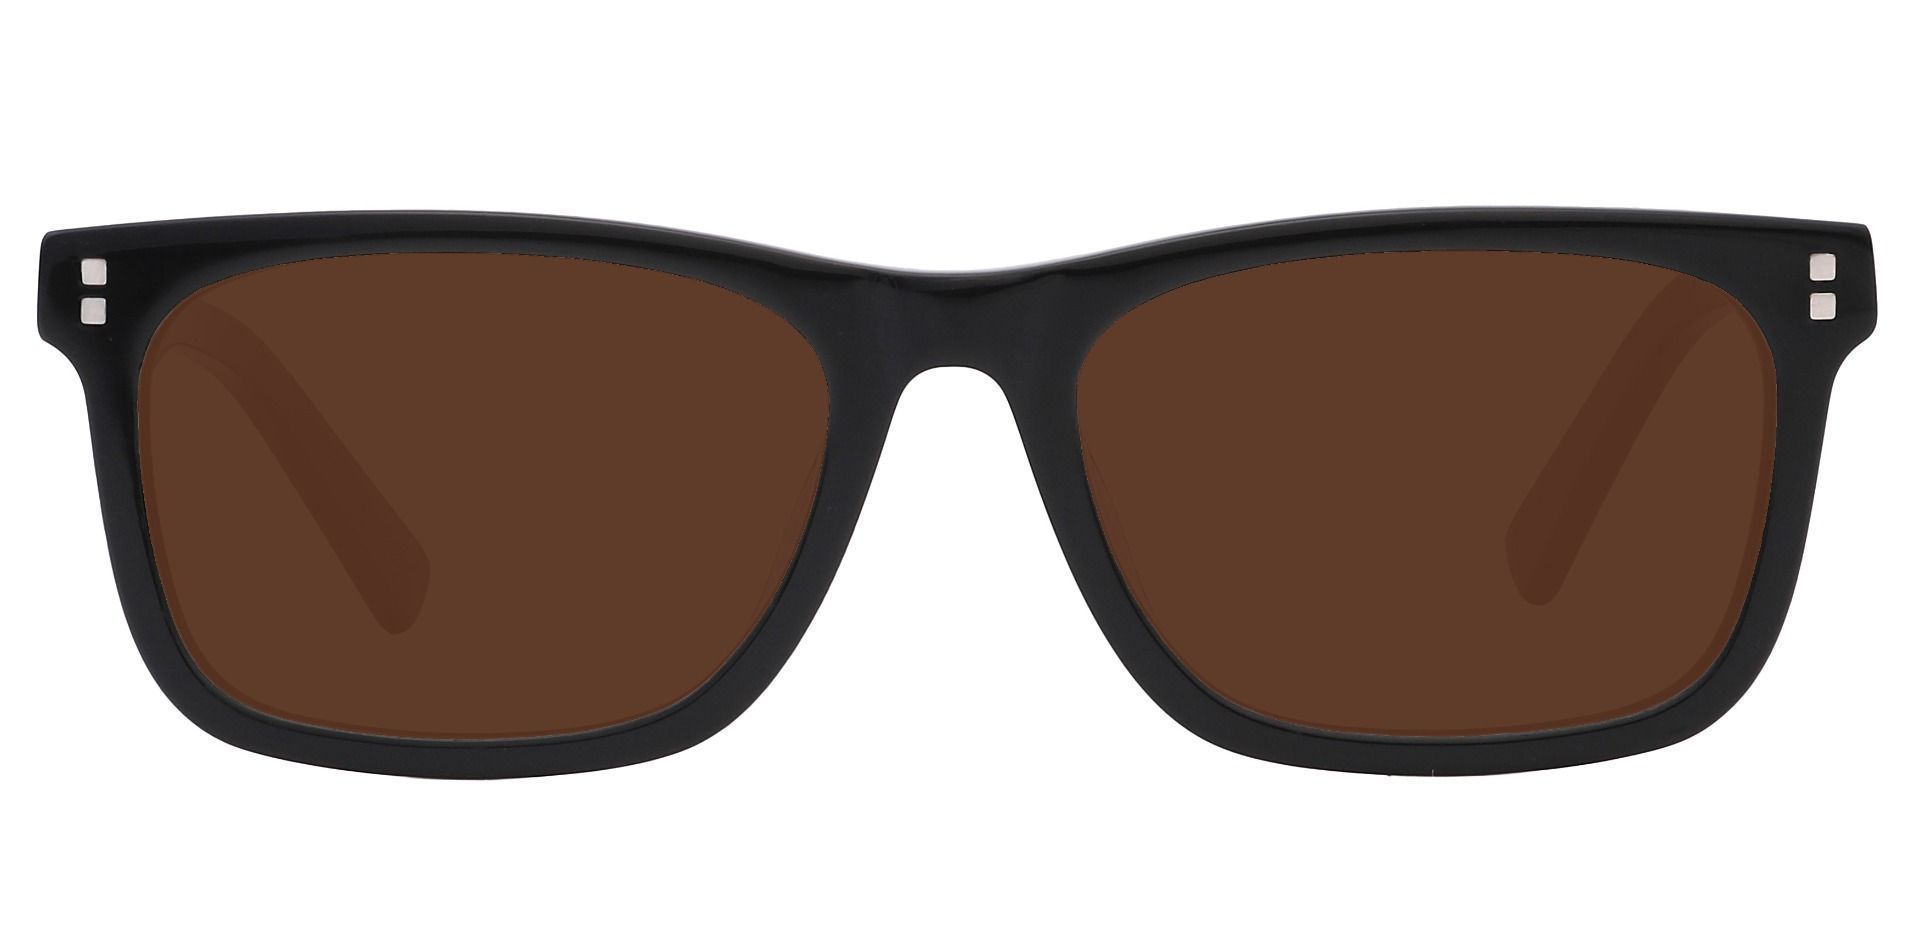 Liberty Rectangle Non-Rx Sunglasses - Black Frame With Brown Lenses